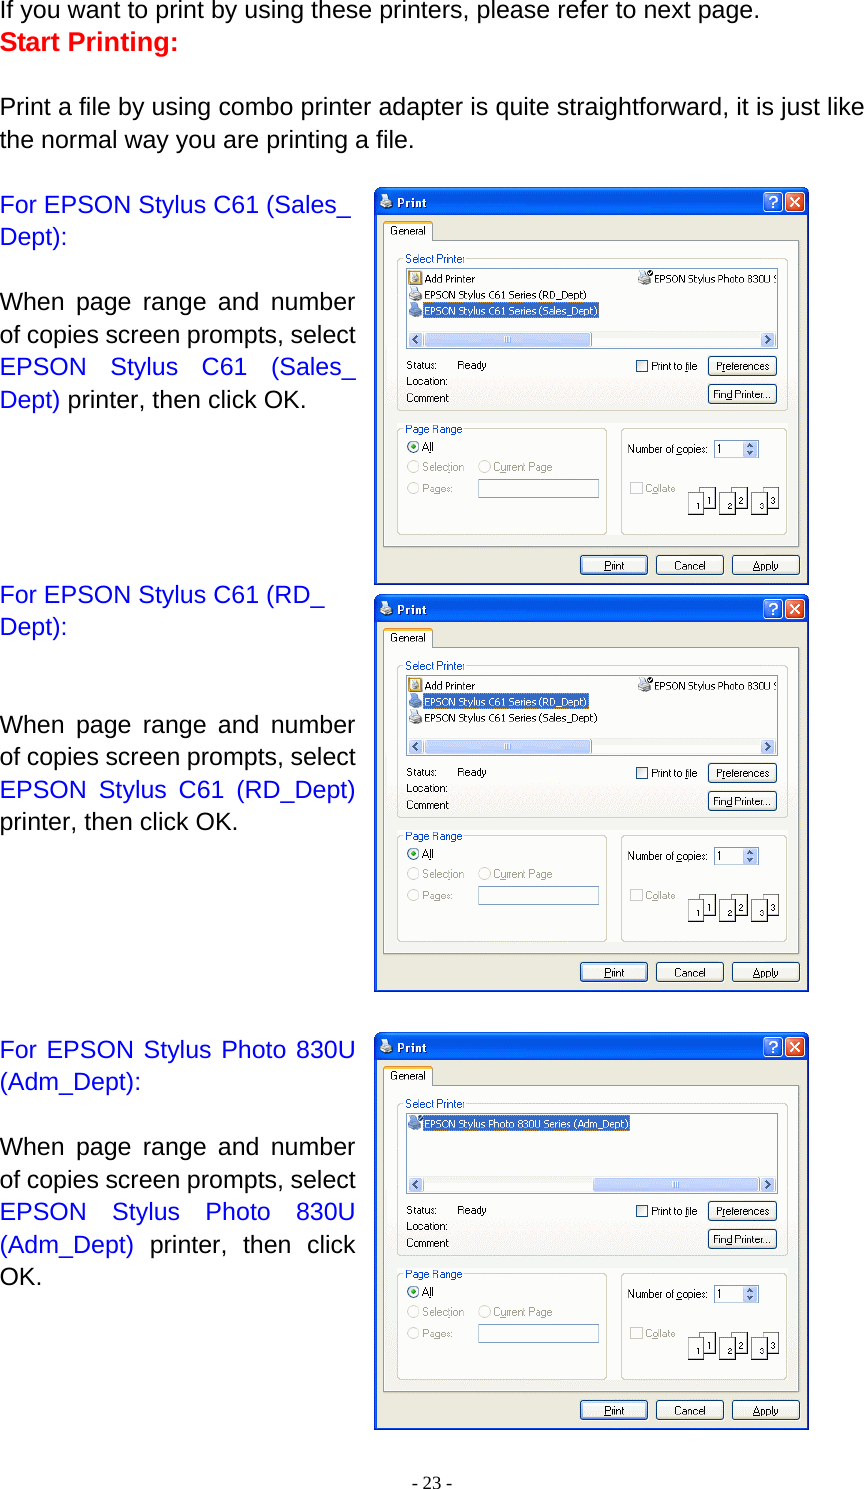  - 23 -If you want to print by using these printers, please refer to next page. Start Printing:  Print a file by using combo printer adapter is quite straightforward, it is just like the normal way you are printing a file.  For EPSON Stylus C61 (Sales_ Dept):  When page range and number of copies screen prompts, select EPSON Stylus C61 (Sales_ Dept) printer, then click OK.      For EPSON Stylus C61 (RD_ Dept):   When page range and number of copies screen prompts, select EPSON Stylus C61 (RD_Dept) printer, then click OK.       For EPSON Stylus Photo 830U (Adm_Dept):  When page range and number of copies screen prompts, select EPSON Stylus Photo 830U (Adm_Dept) printer, then click OK.     